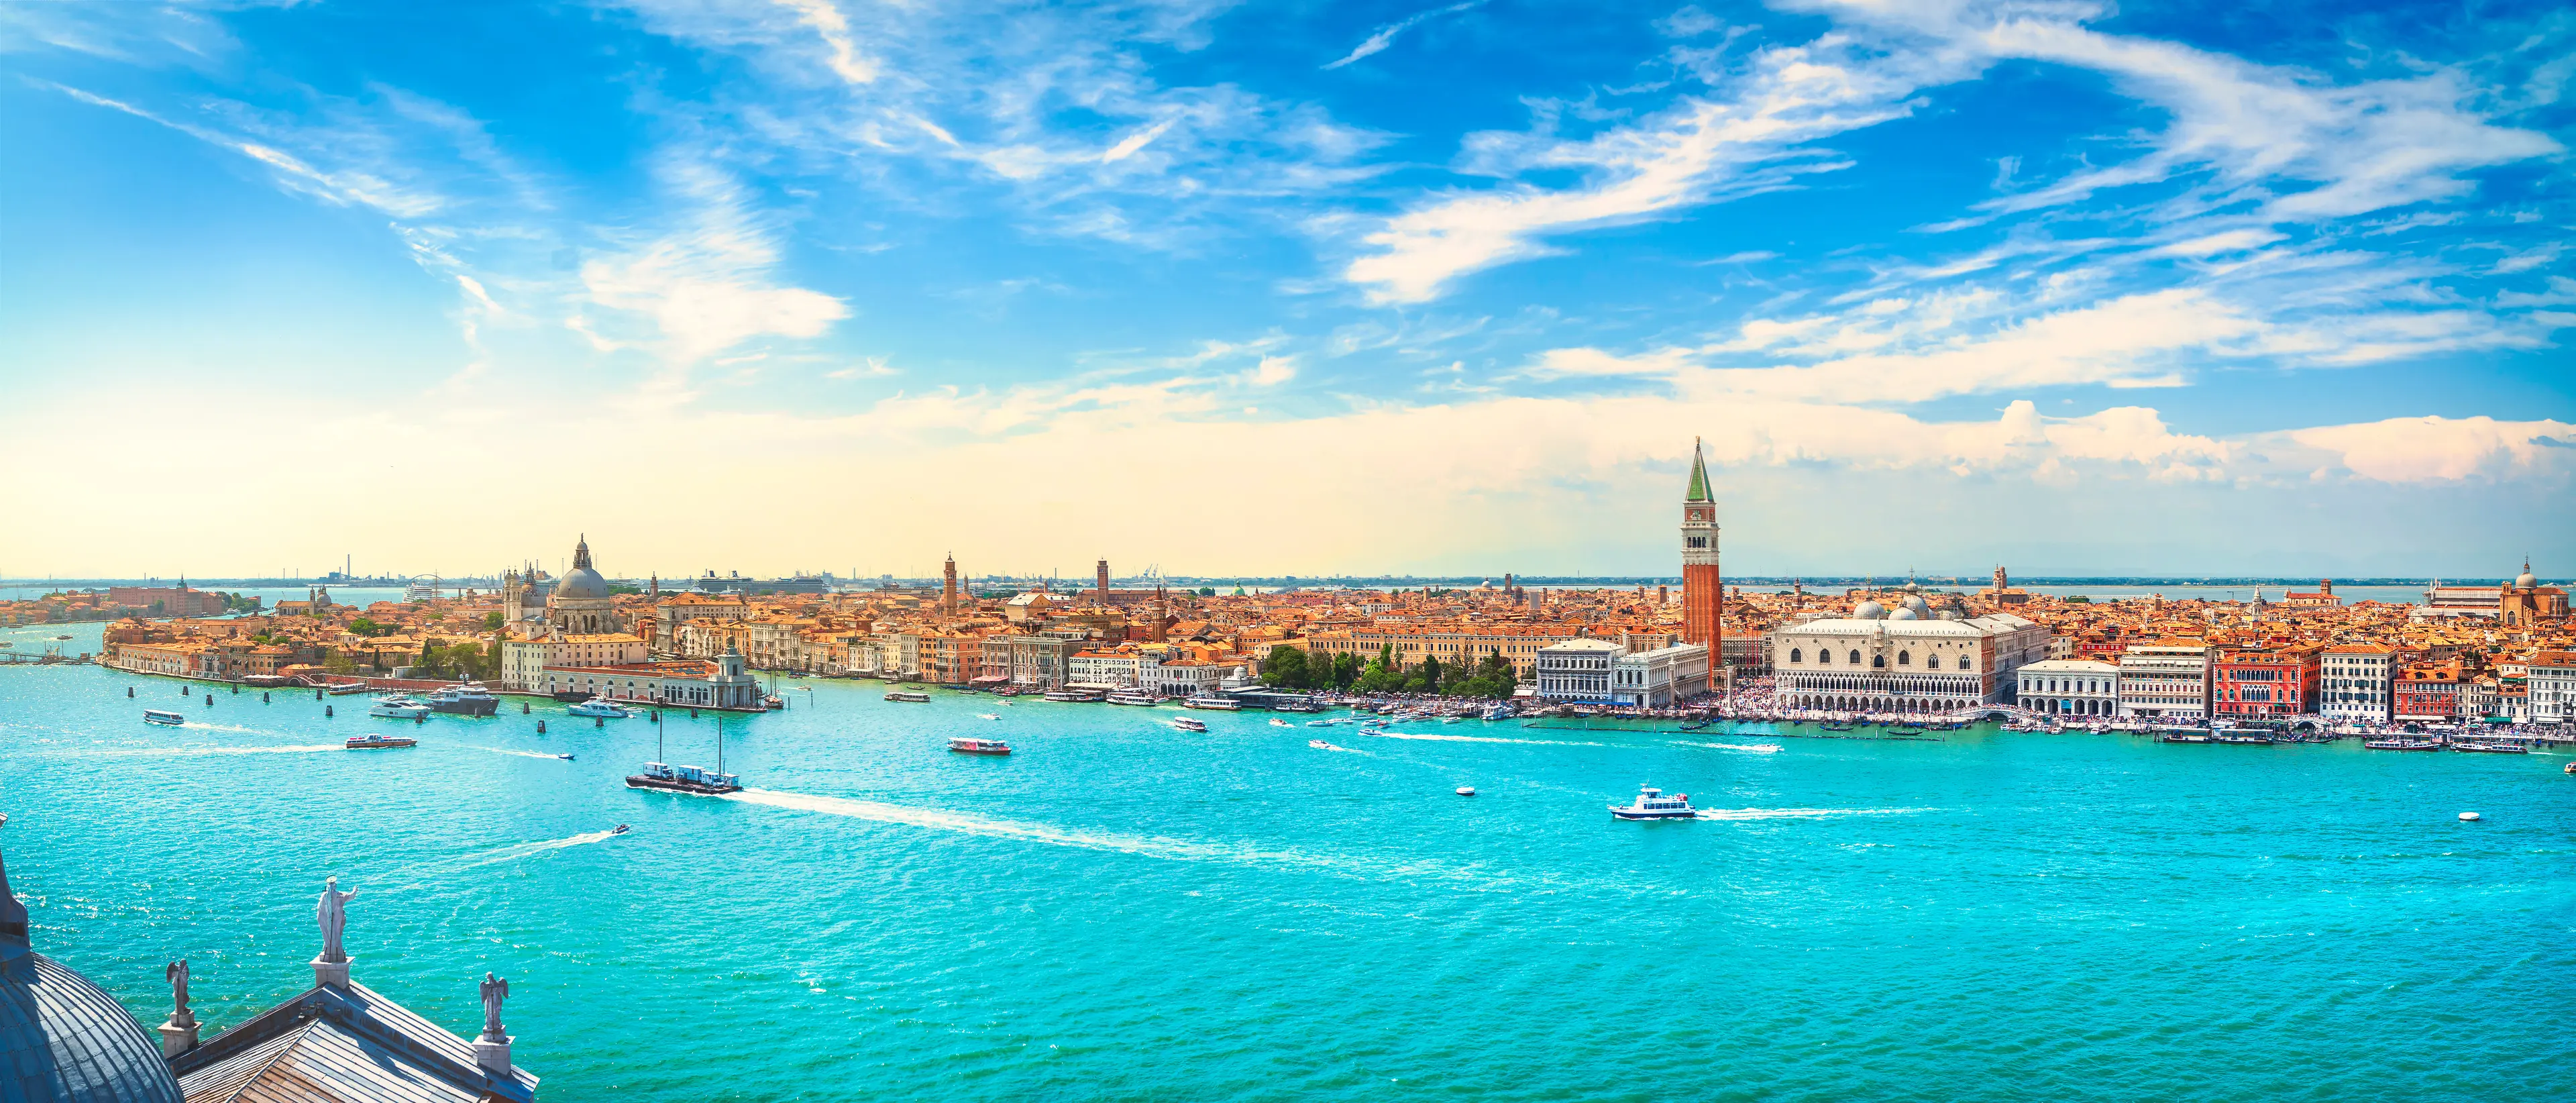 Explore Venice, Italy: A Comprehensive 2-Day Itinerary